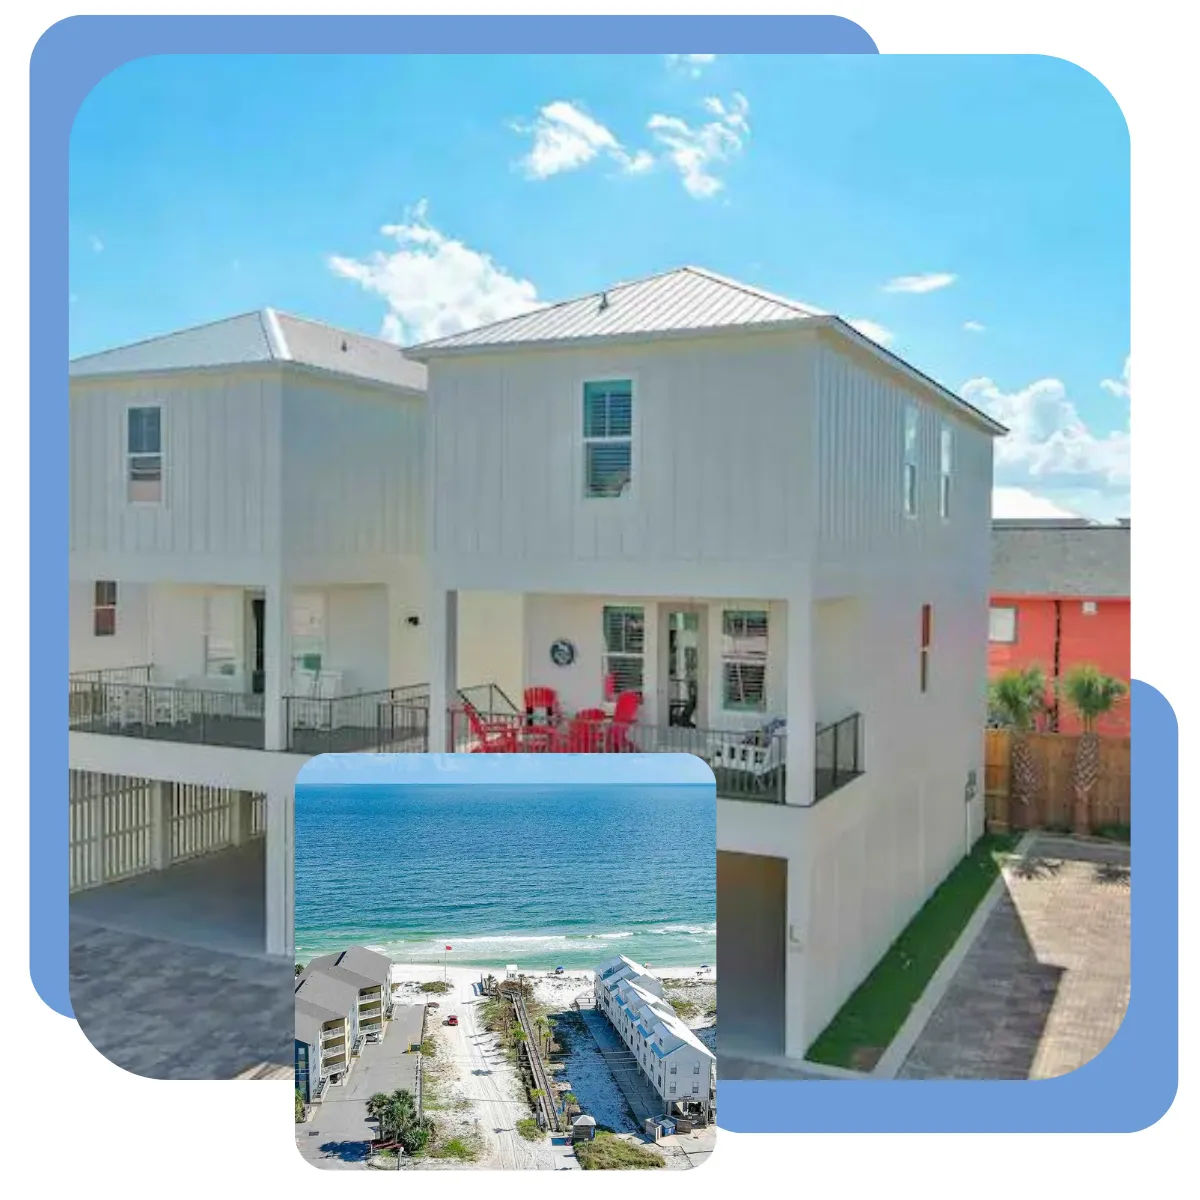 Stay at Beach Haven Cottage in Gulf Shores, AL, a lovely home on Beach Blvd's quiet end. Decorated with art and comfy furniture, it's close to the beach, has a pool, parking, outdoor shower, and TVs in every room. Just 5 minutes from "The Hang Out" and shops, it's a top-rated spot!